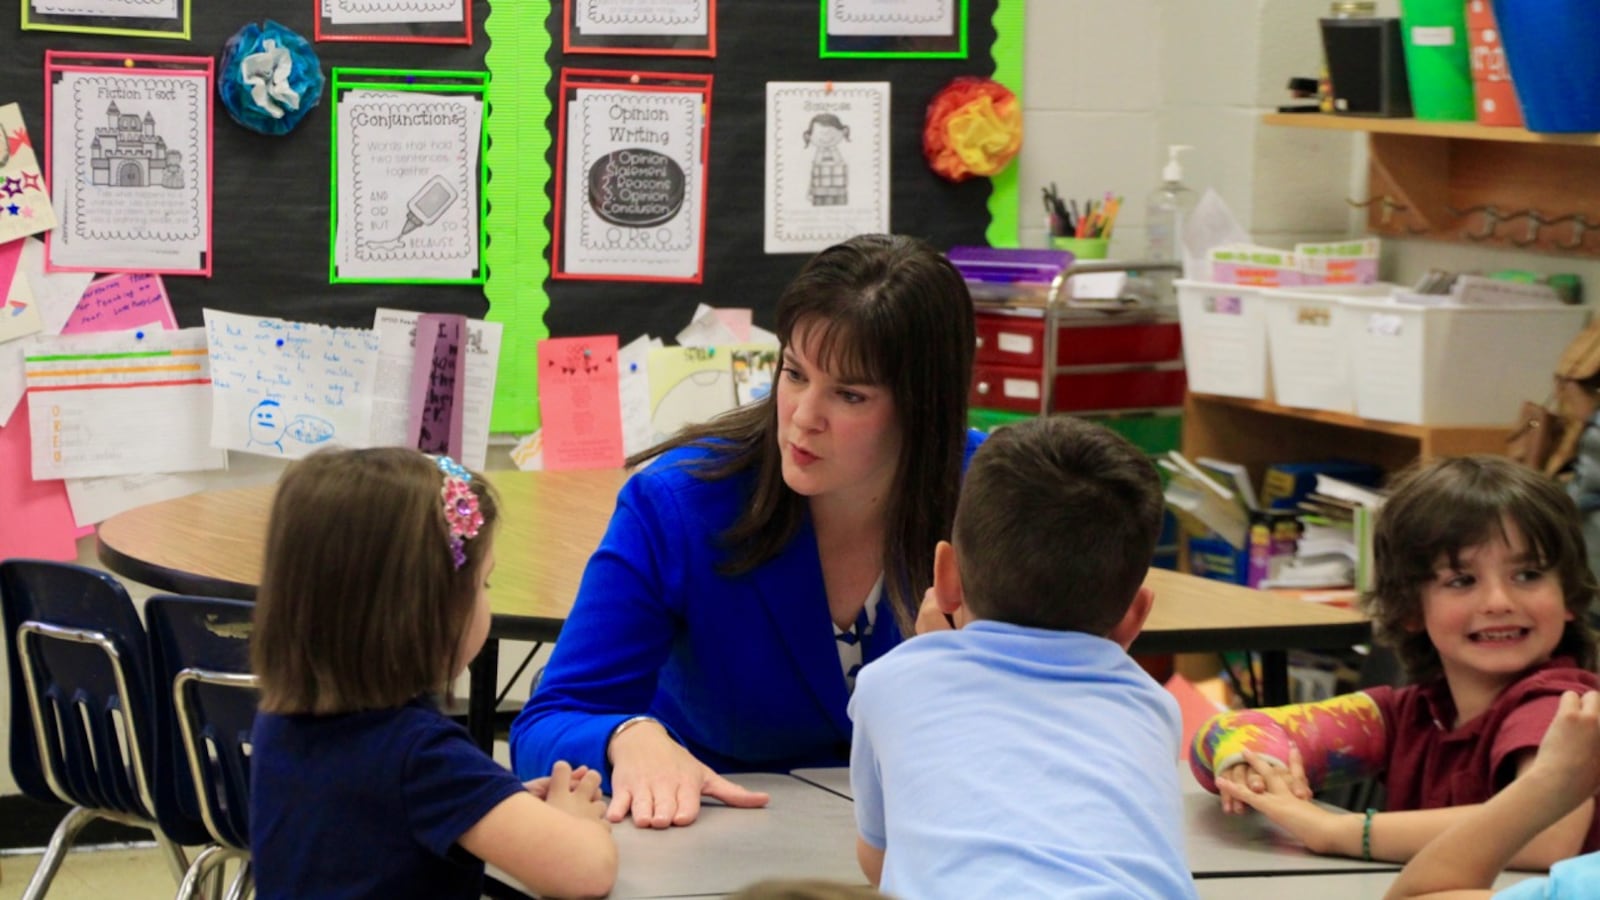 Education Commissioner Candice McQueen visits with students in April at Farmington Elementary School in Germantown.